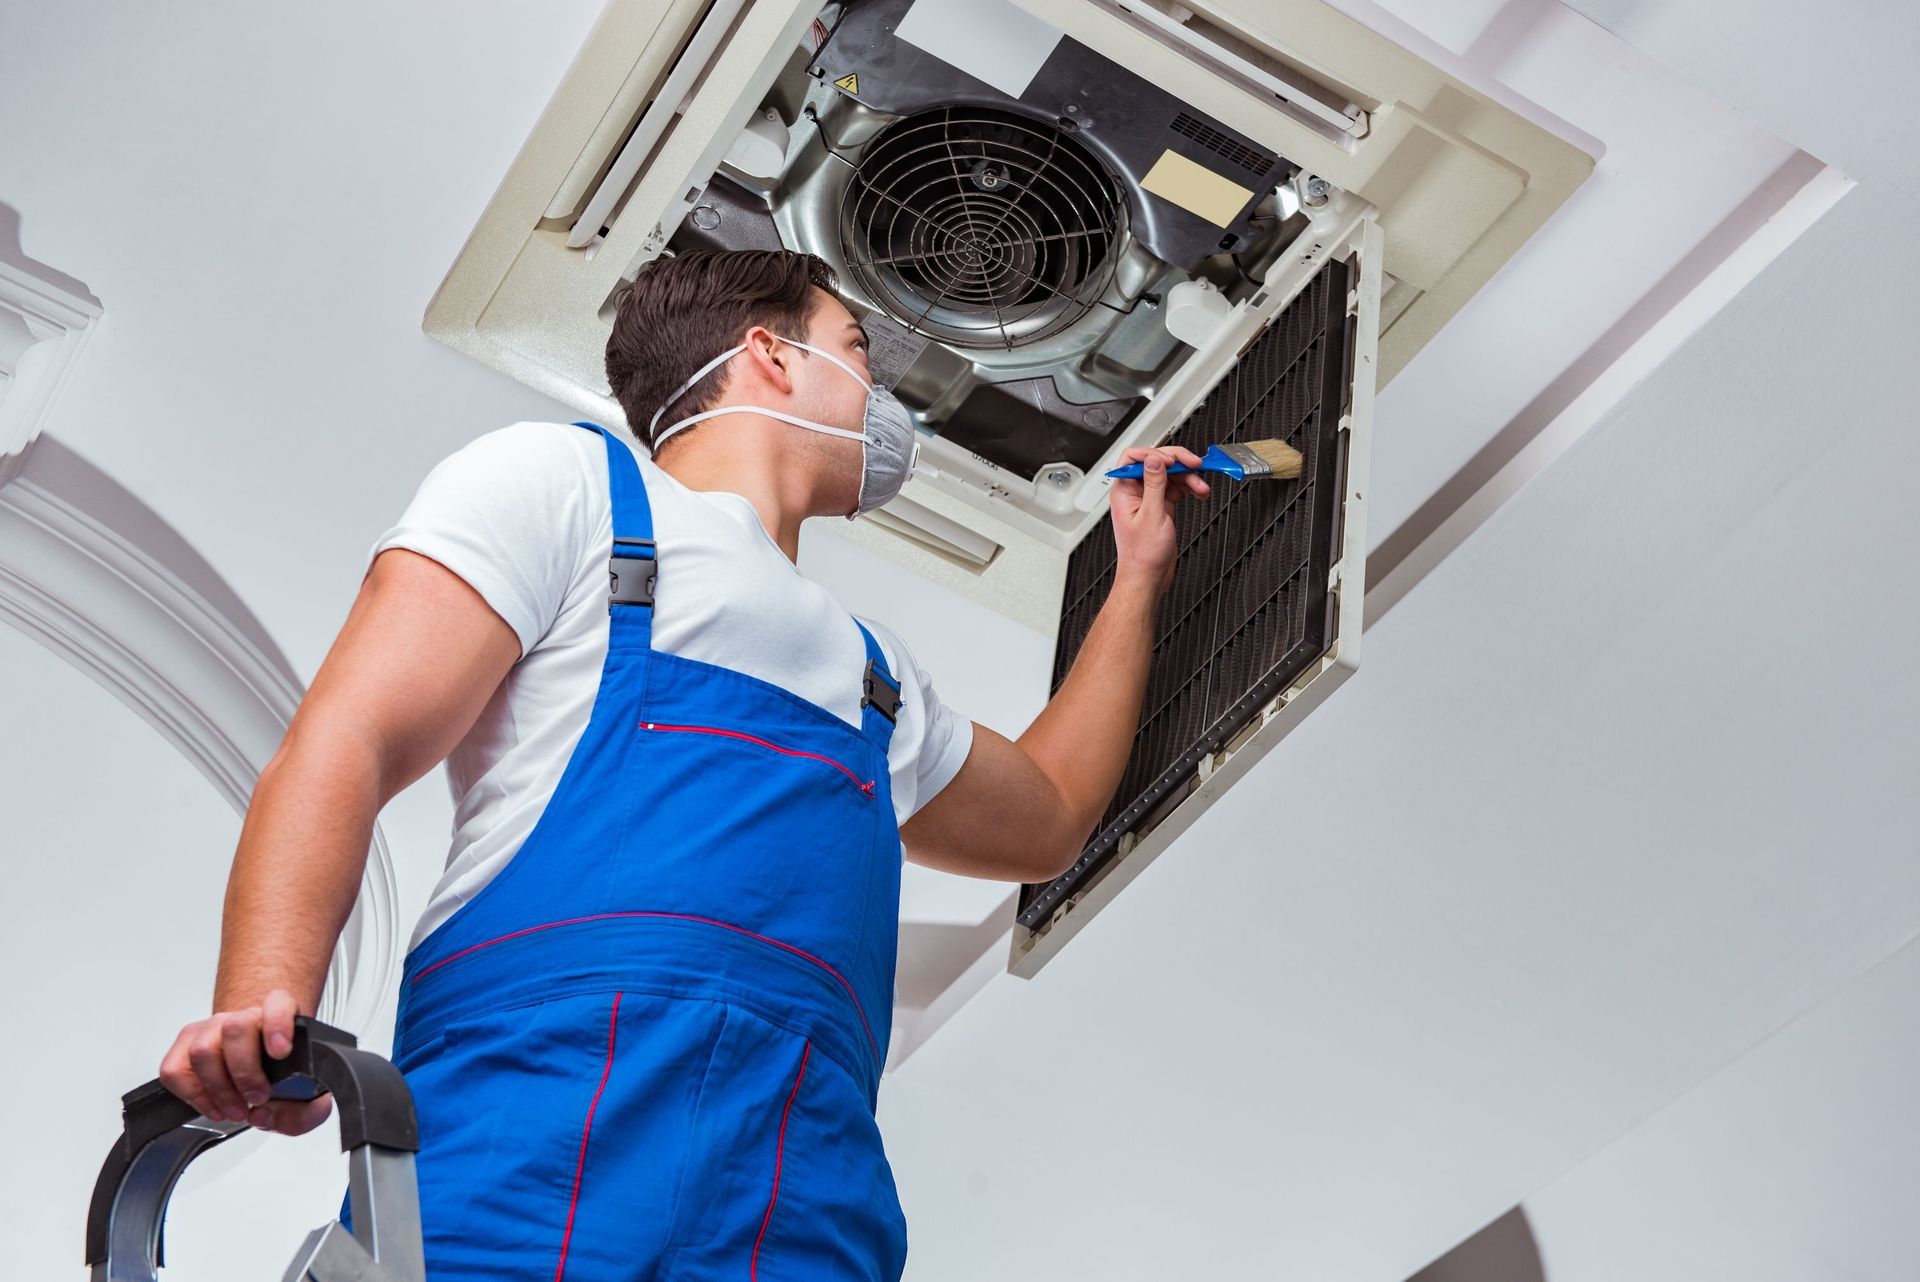 worker repairing ceiling air conditioning unit